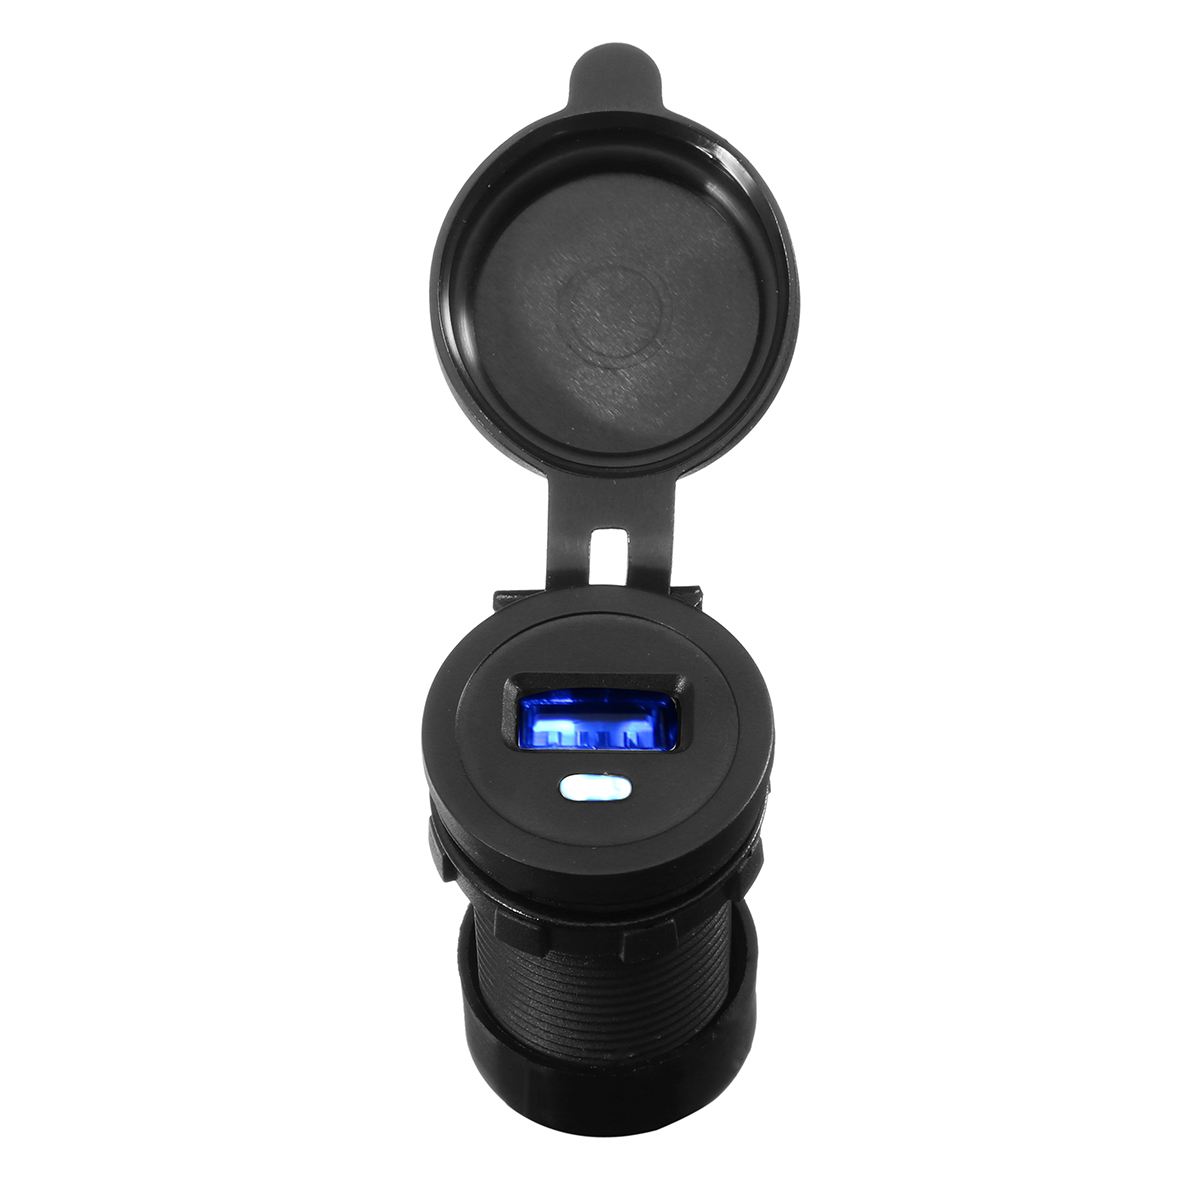 12V 1A USB Socket Charger with Waterproof Cap for BMW Motorcycle - Auto GoShop